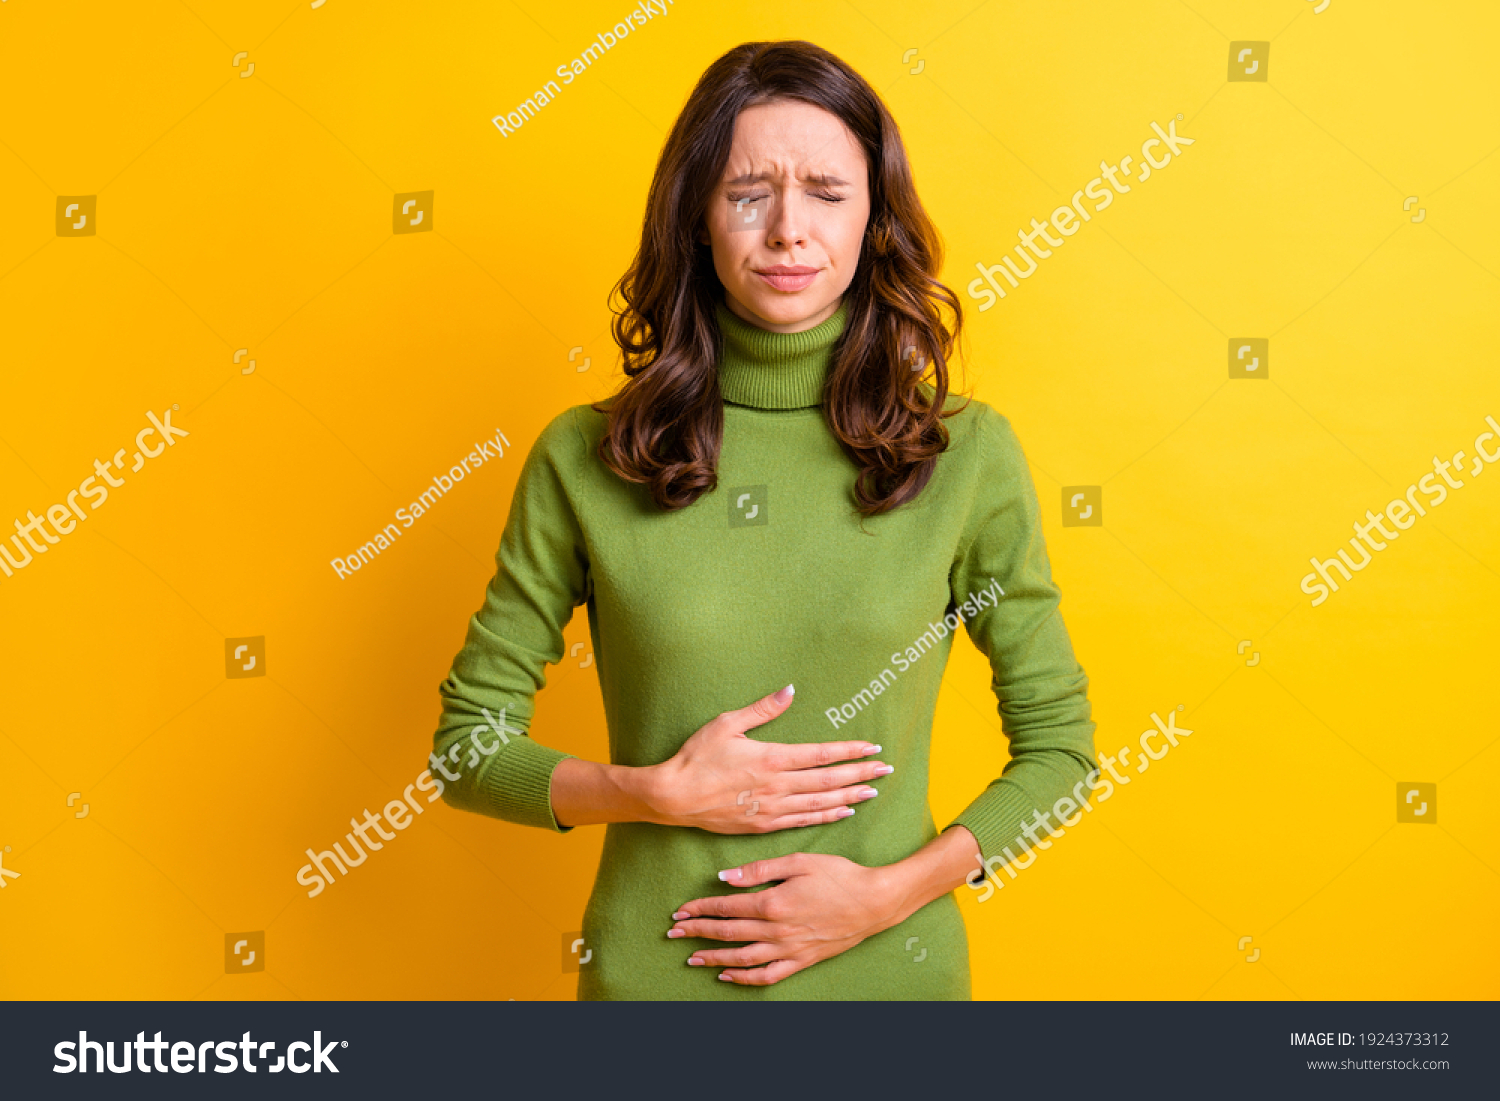 Photo of young unhappy unwell sick ill woman hold hand on stomach suffers pain pms isolated on yellow color background #1924373312